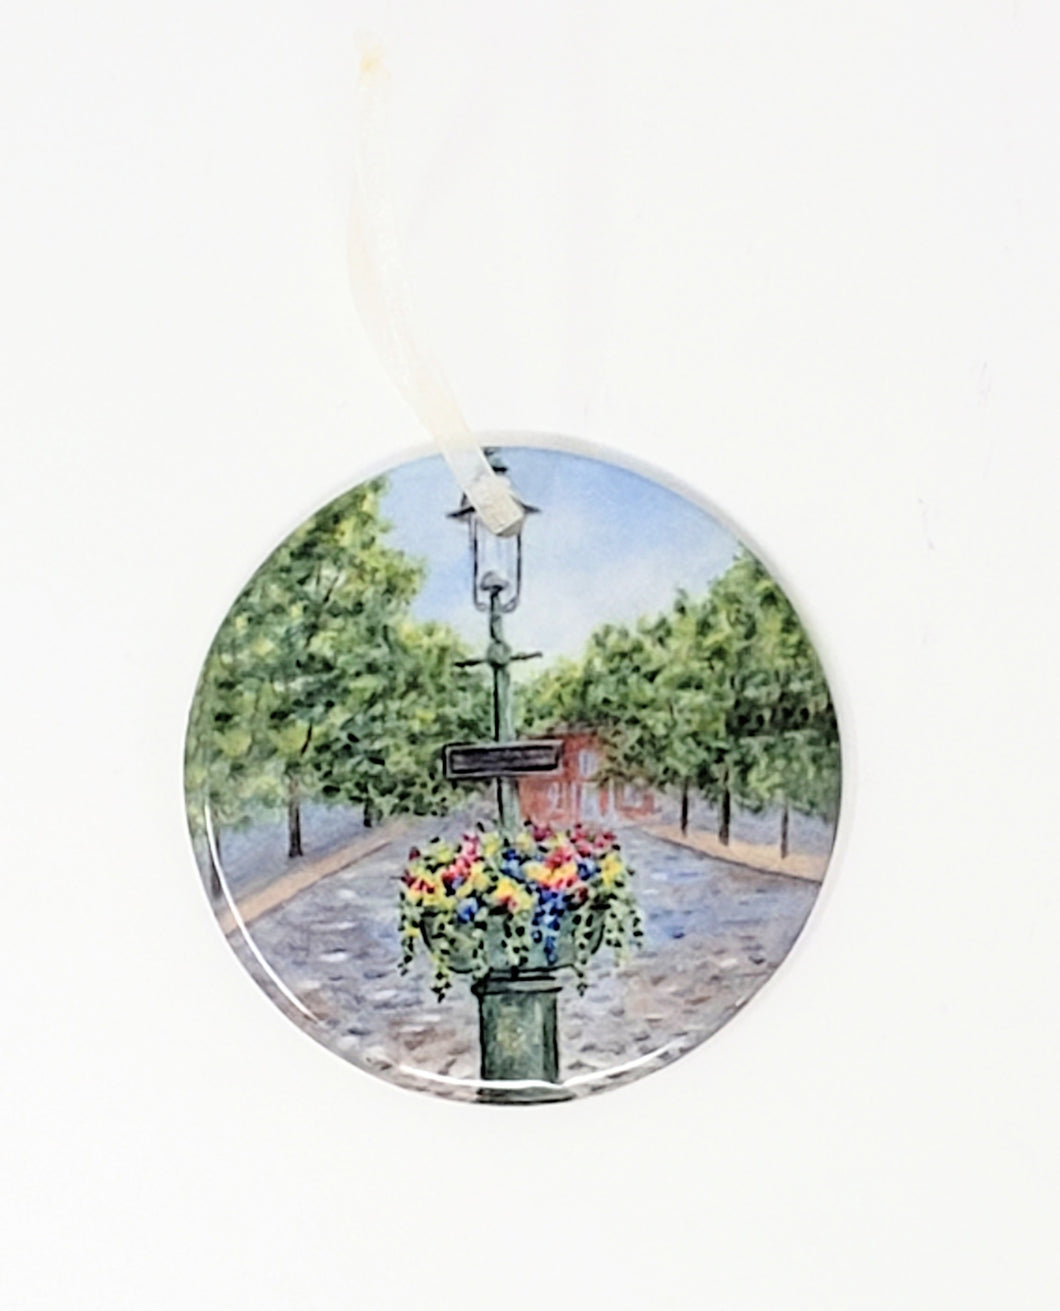 Nantucket Christmas Ornament, Nantucket Ceramic Ornaments Cape Cod gift Christmas gift for dad small gift for mom - Leigh Barry Watercolors